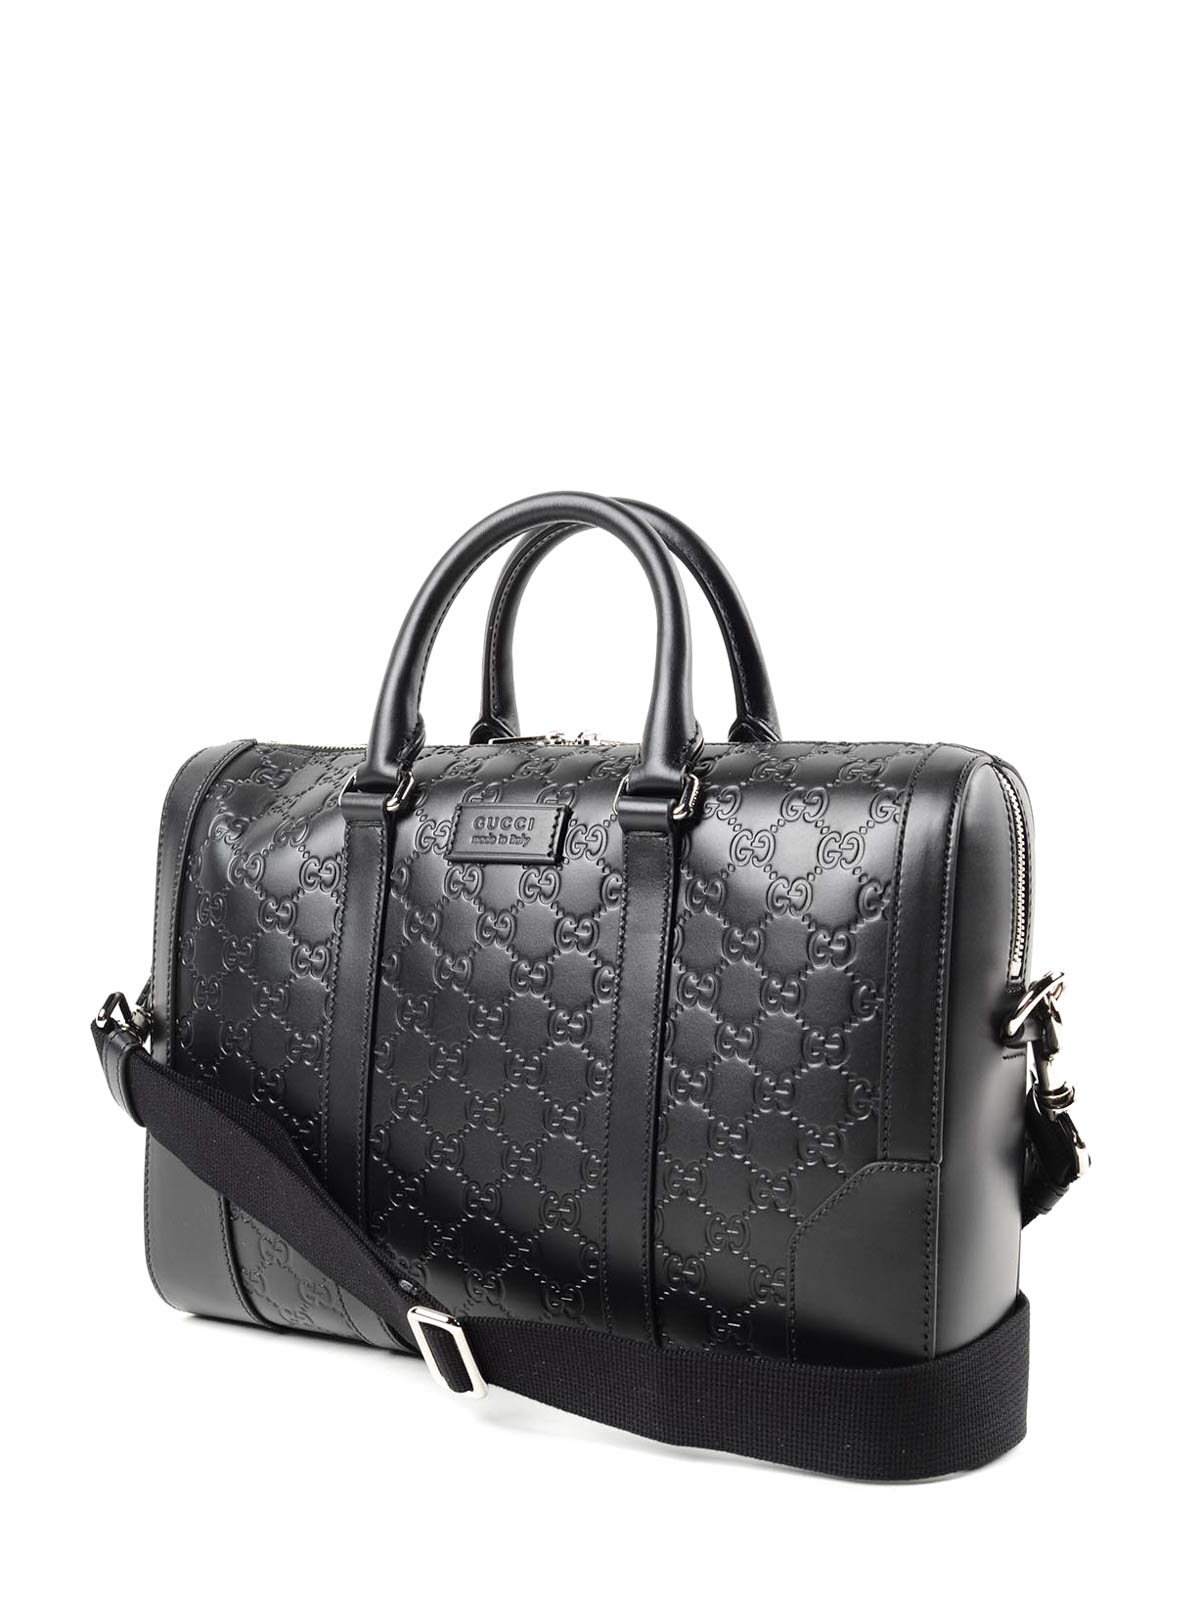 GUCCI GUCCISSIMA BLACK EMBOSSED LEATHER DUFFLE BAG